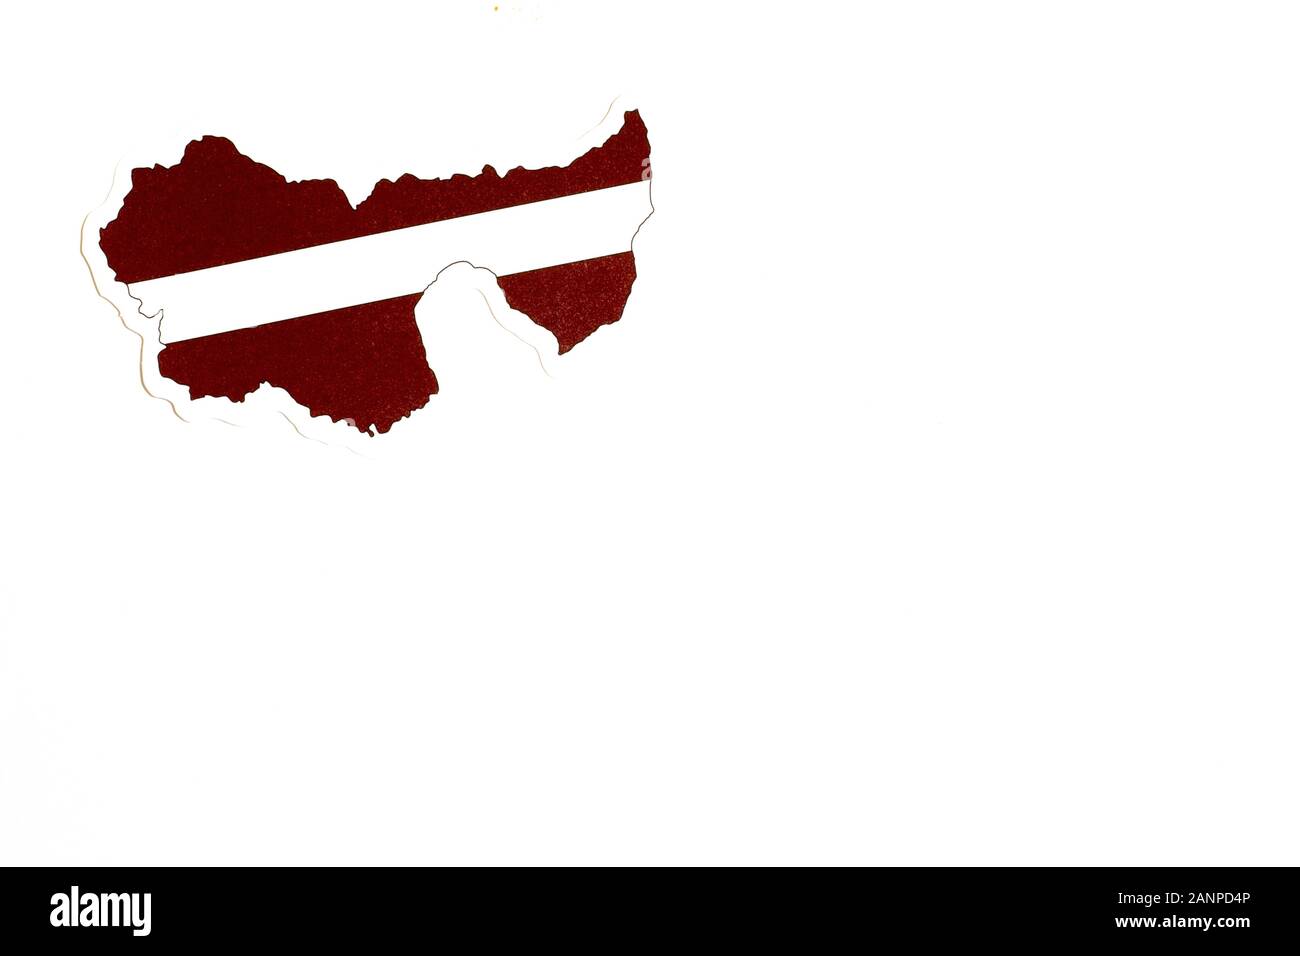 Los Angeles, California, USA - 17 January 2020: National flag of Latvia. Country outline on white background with copy space. Politics illustration Stock Photo